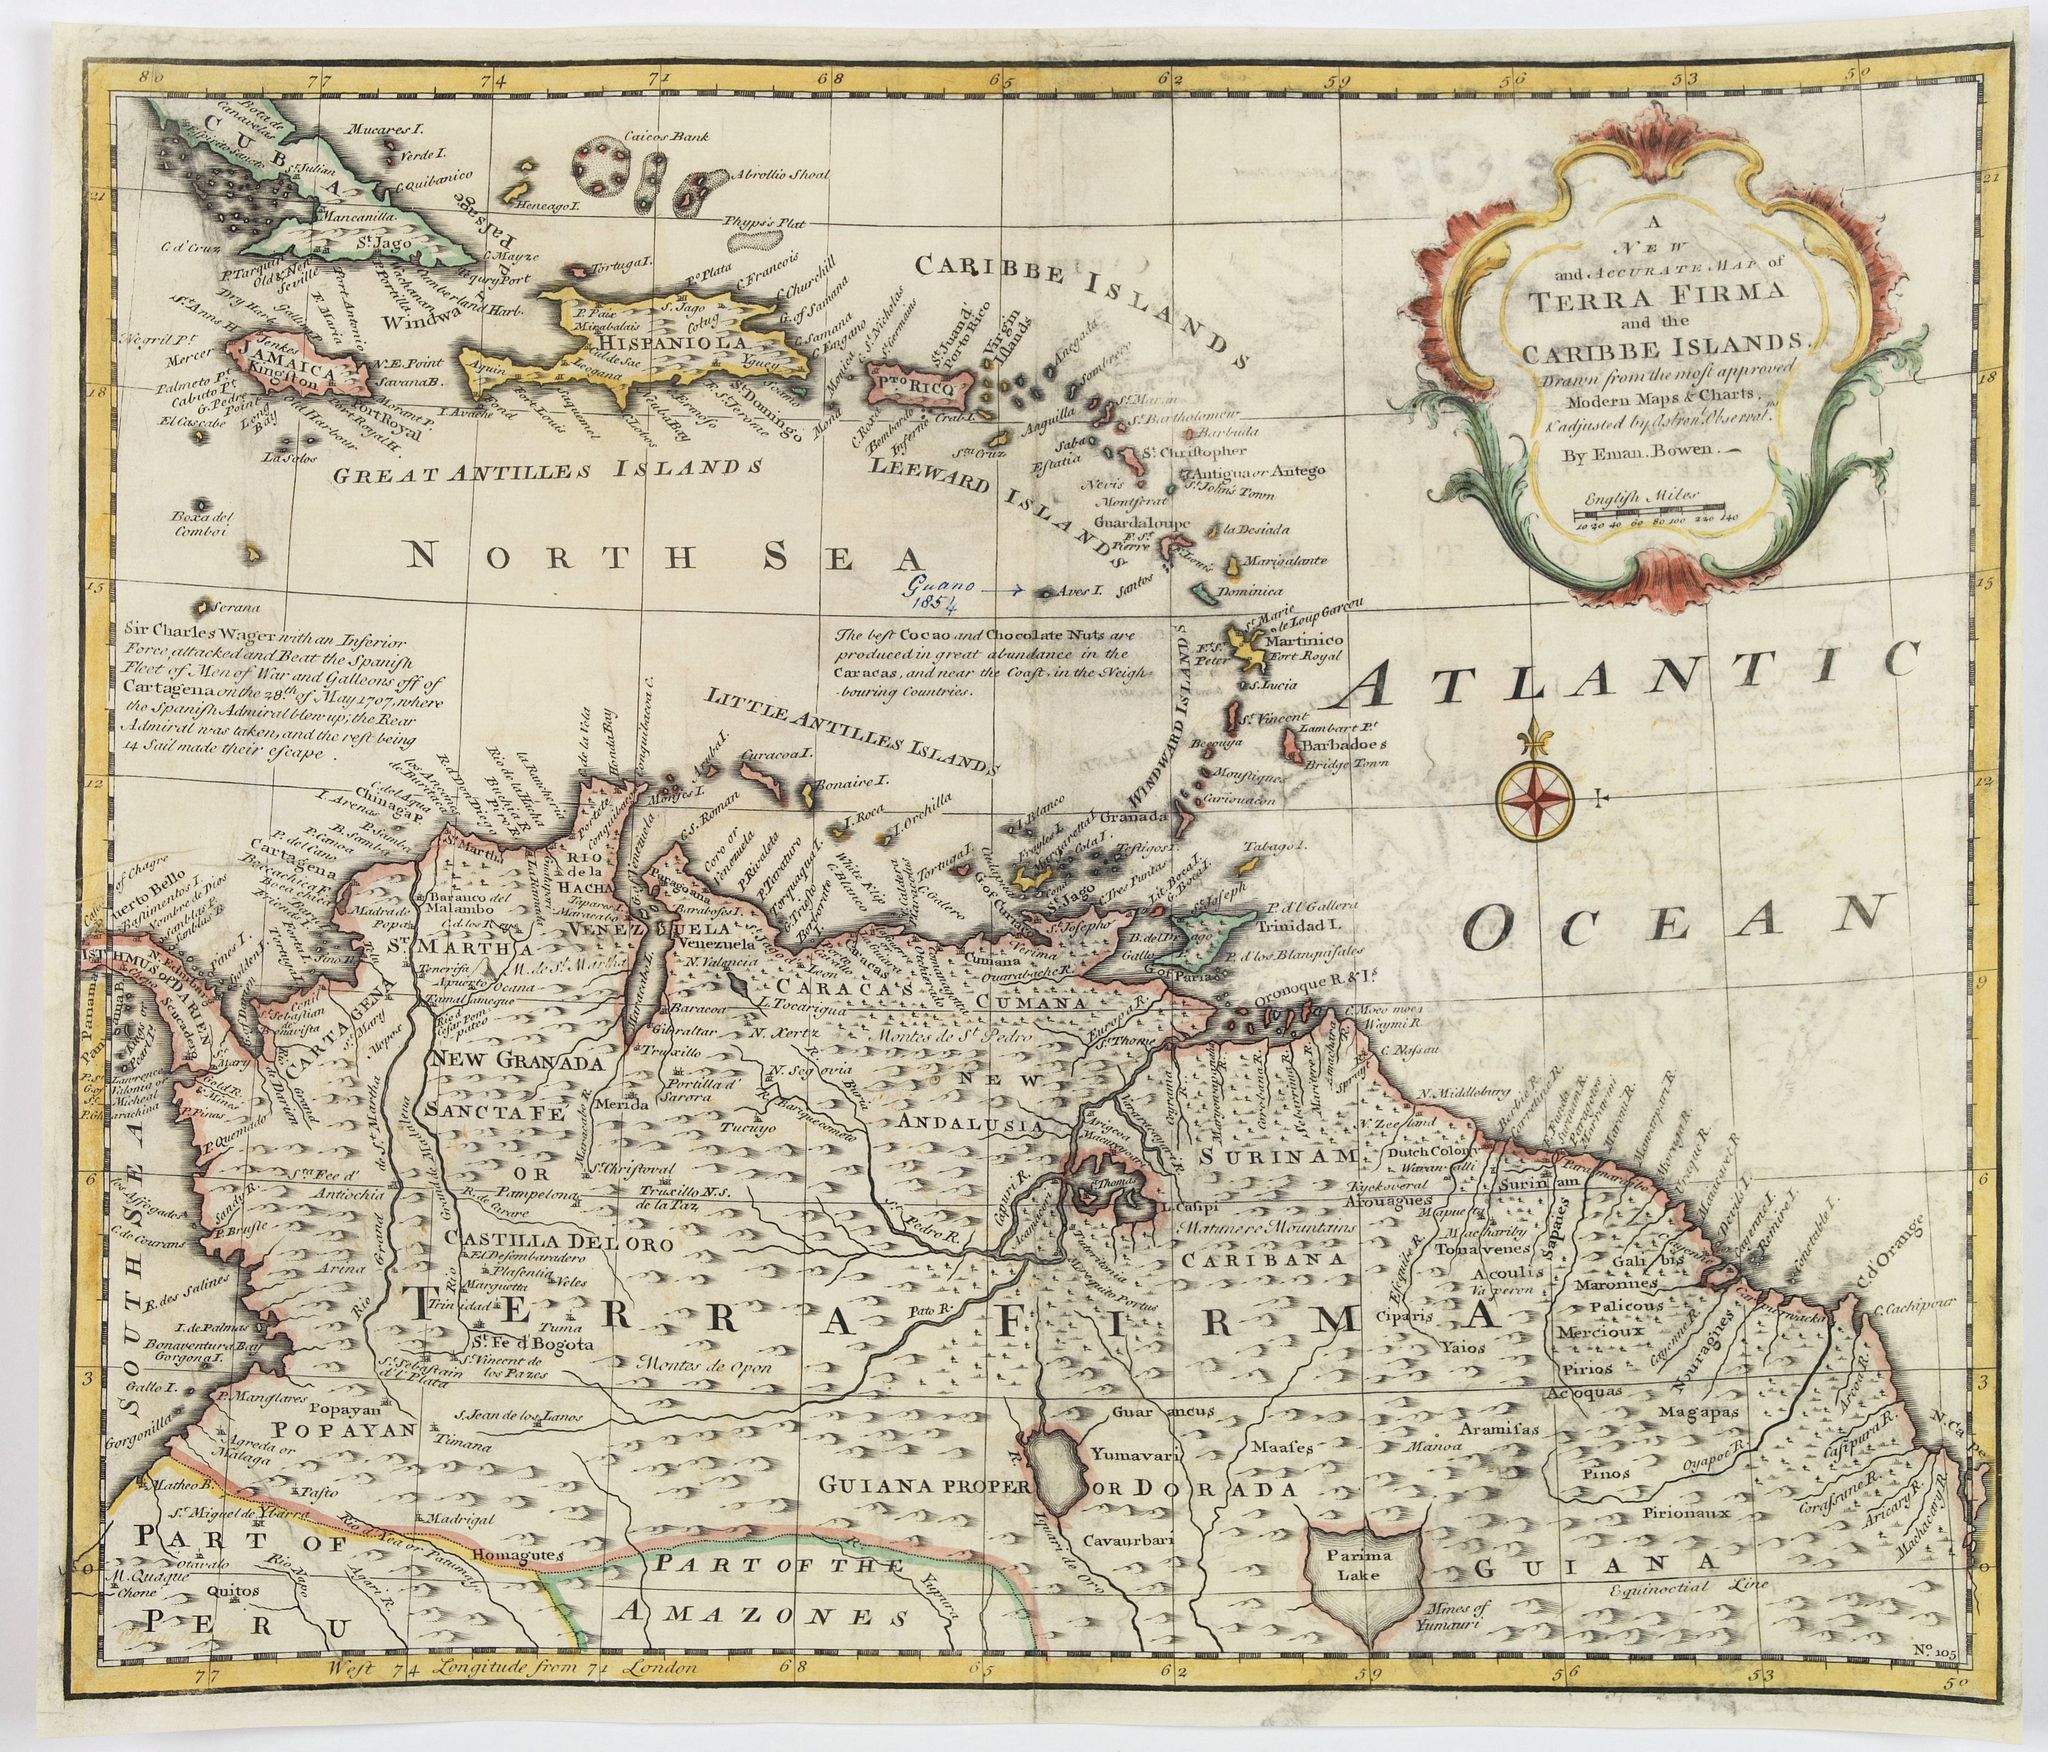 A New and Accurate Map of Terra Firma and the Caribbe Islands